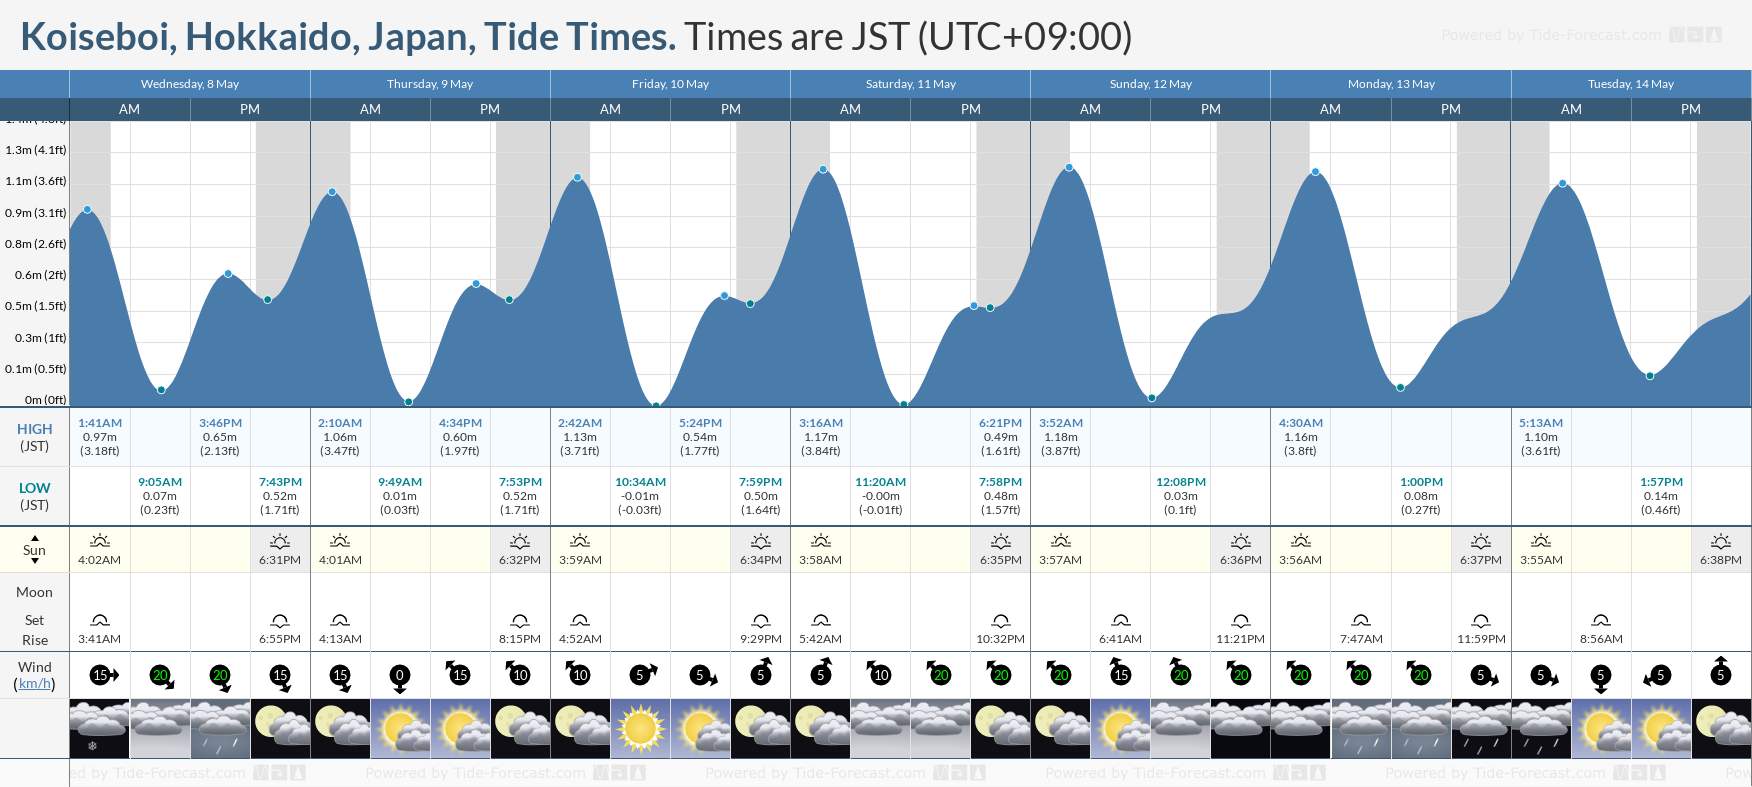 Koiseboi, Hokkaido, Japan Tide Chart including high and low tide tide times for the next 7 days